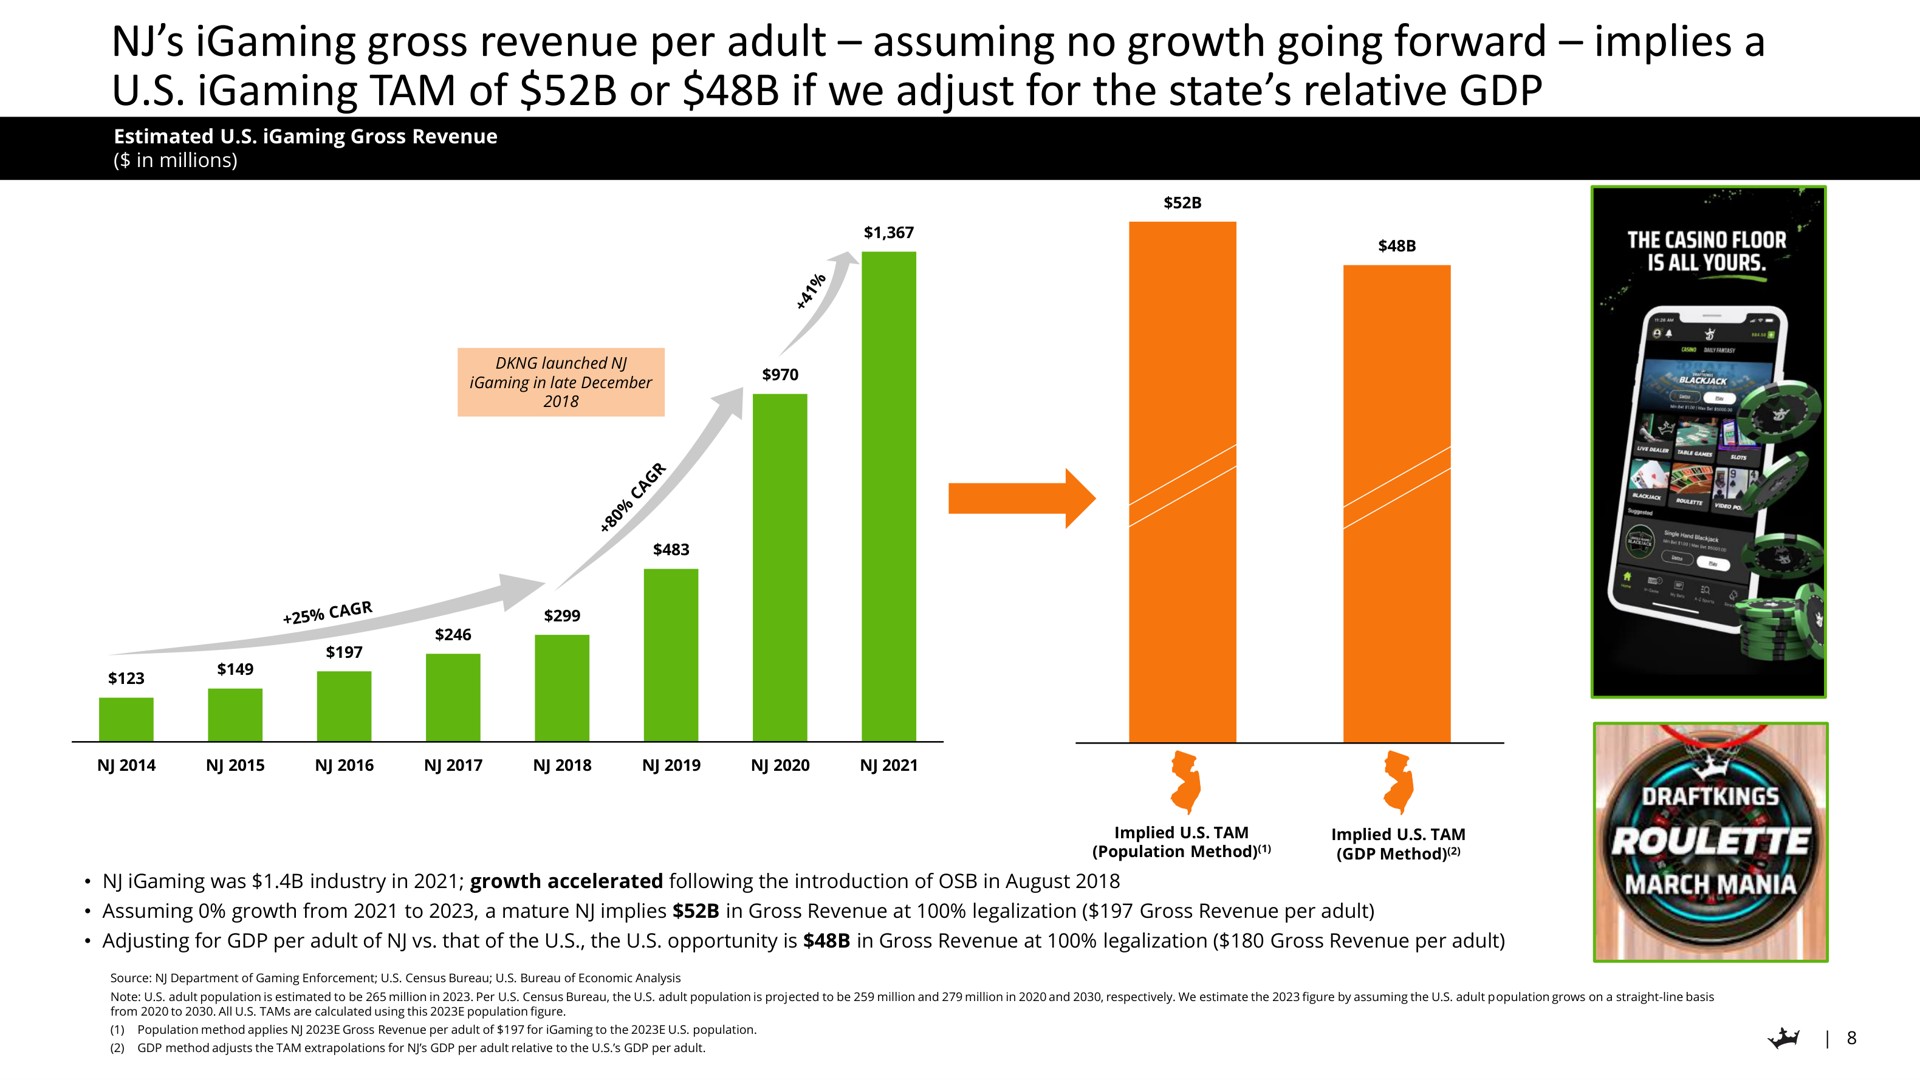 gross revenue per adult assuming no growth going forward implies a tam of or if we adjust for the state relative roulette population | DraftKings